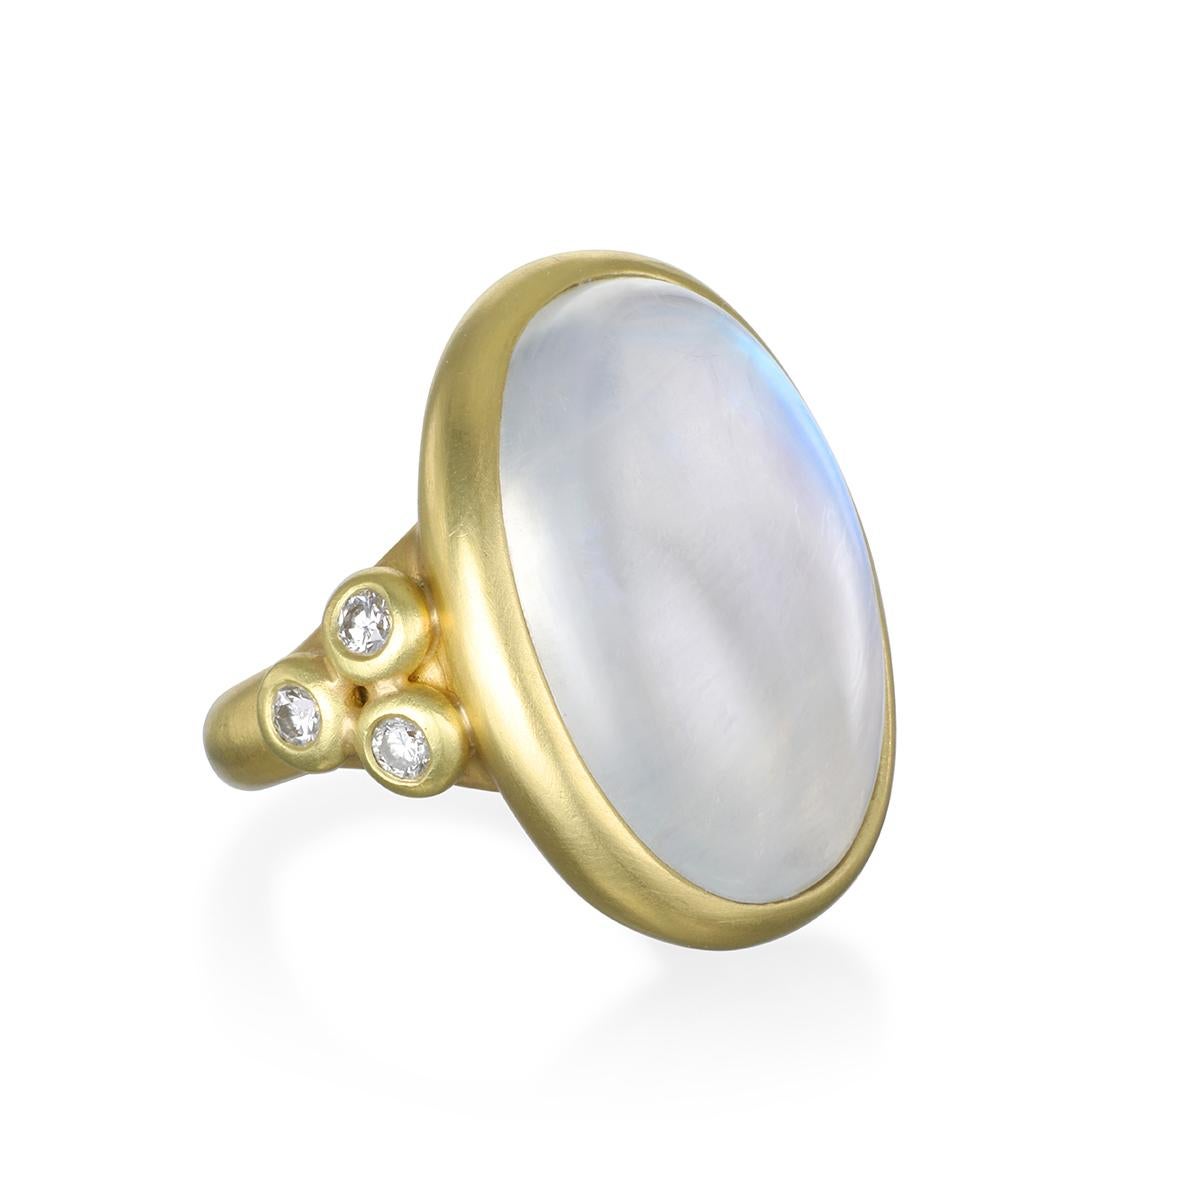 Considered to be a stone of inner growth and strength, this round rainbow moonstone with its three side bead diamonds has been set by designer Faye Kim in 18k gold and reflects a bluish, milky light that has been compared to the light of the moon.